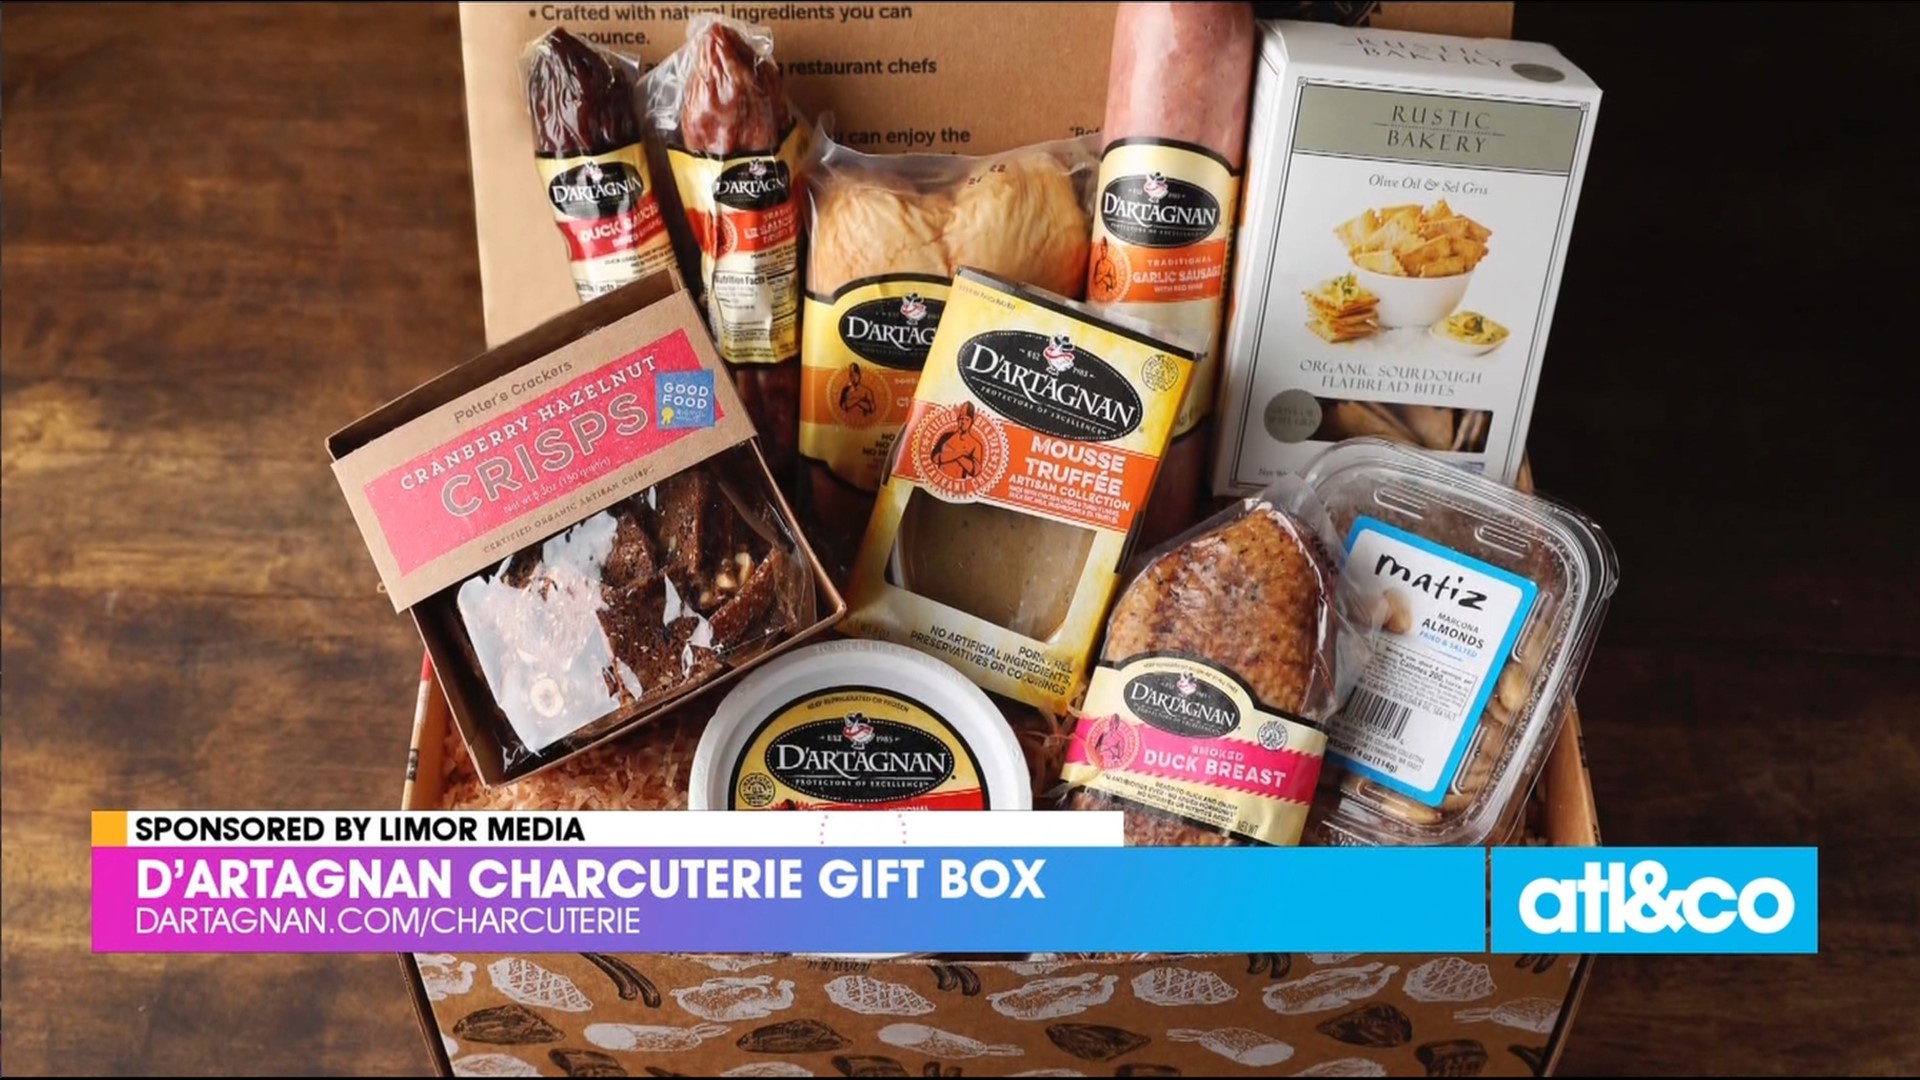 Lifestyle contributor Limor Suss shares lovely gift ideas from Chateau Ste. Michelle, D'Artagnan, and CookingPal.